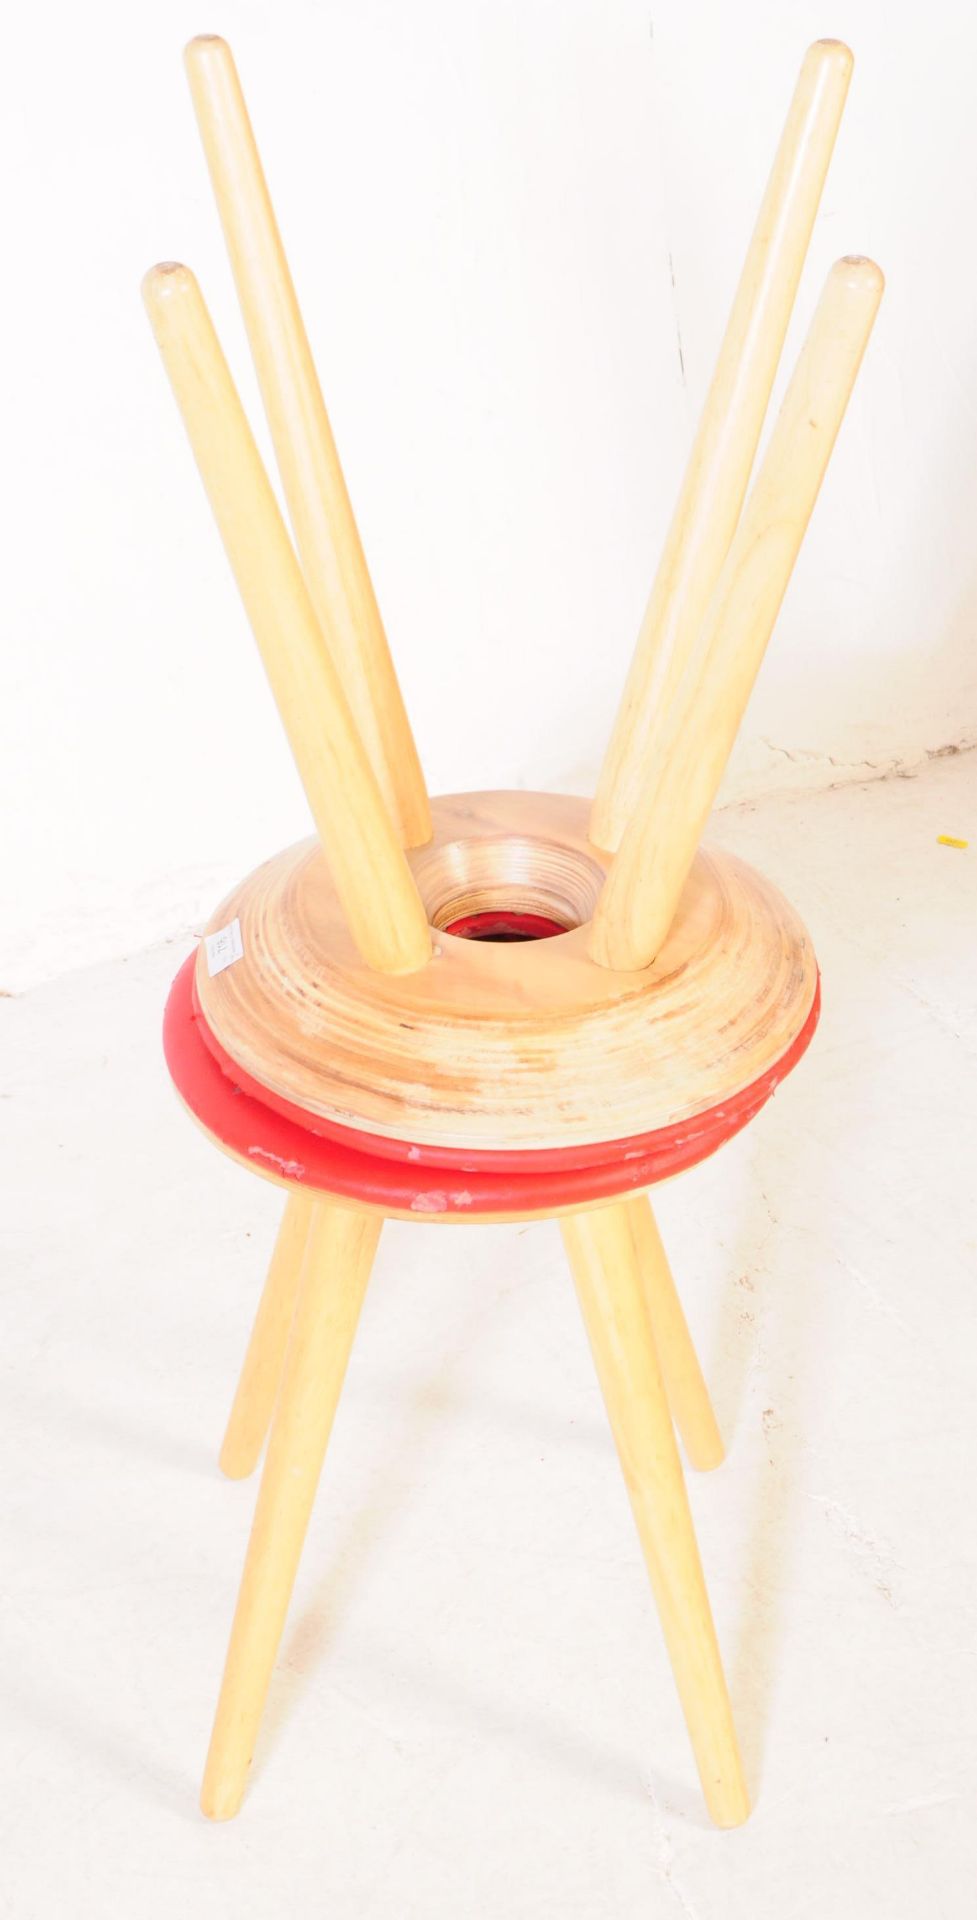 PAIR OF MID CENTURY VINYL TOPPED STOOLS - Image 6 of 6